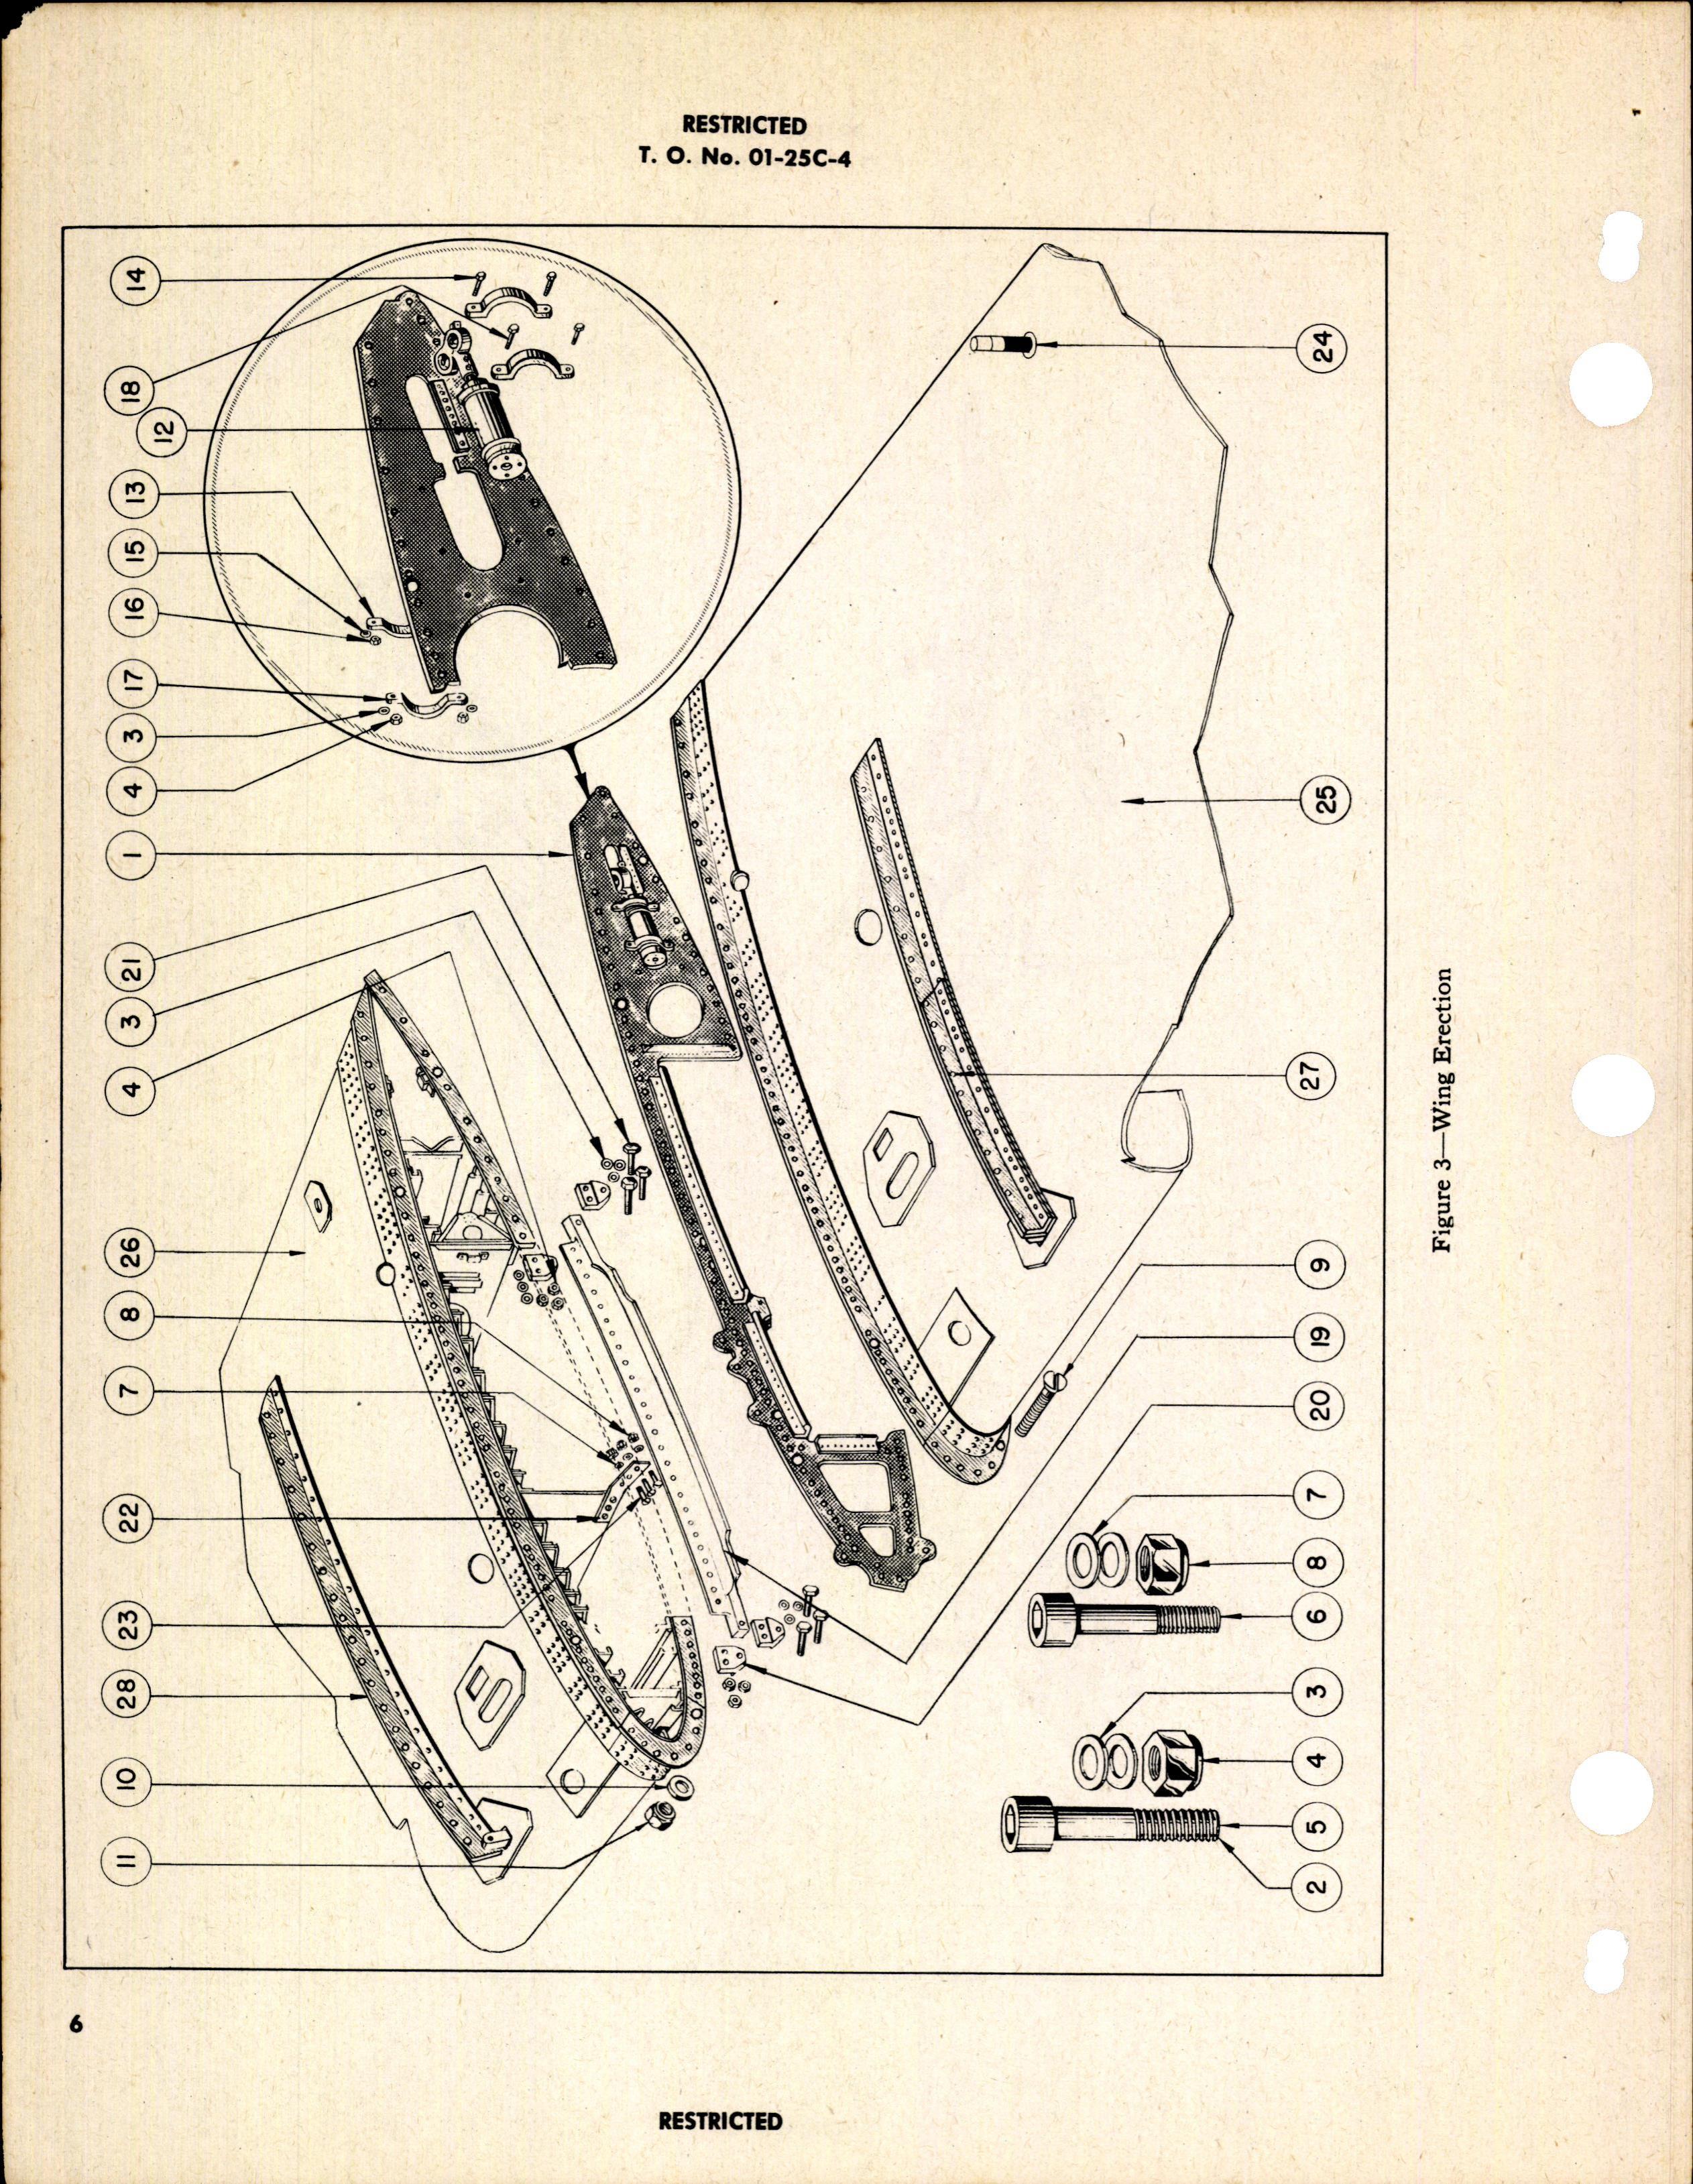 Sample page 12 from AirCorps Library document: Parts Catalog for P-40M and P-40N, Kittyhawk III and IV